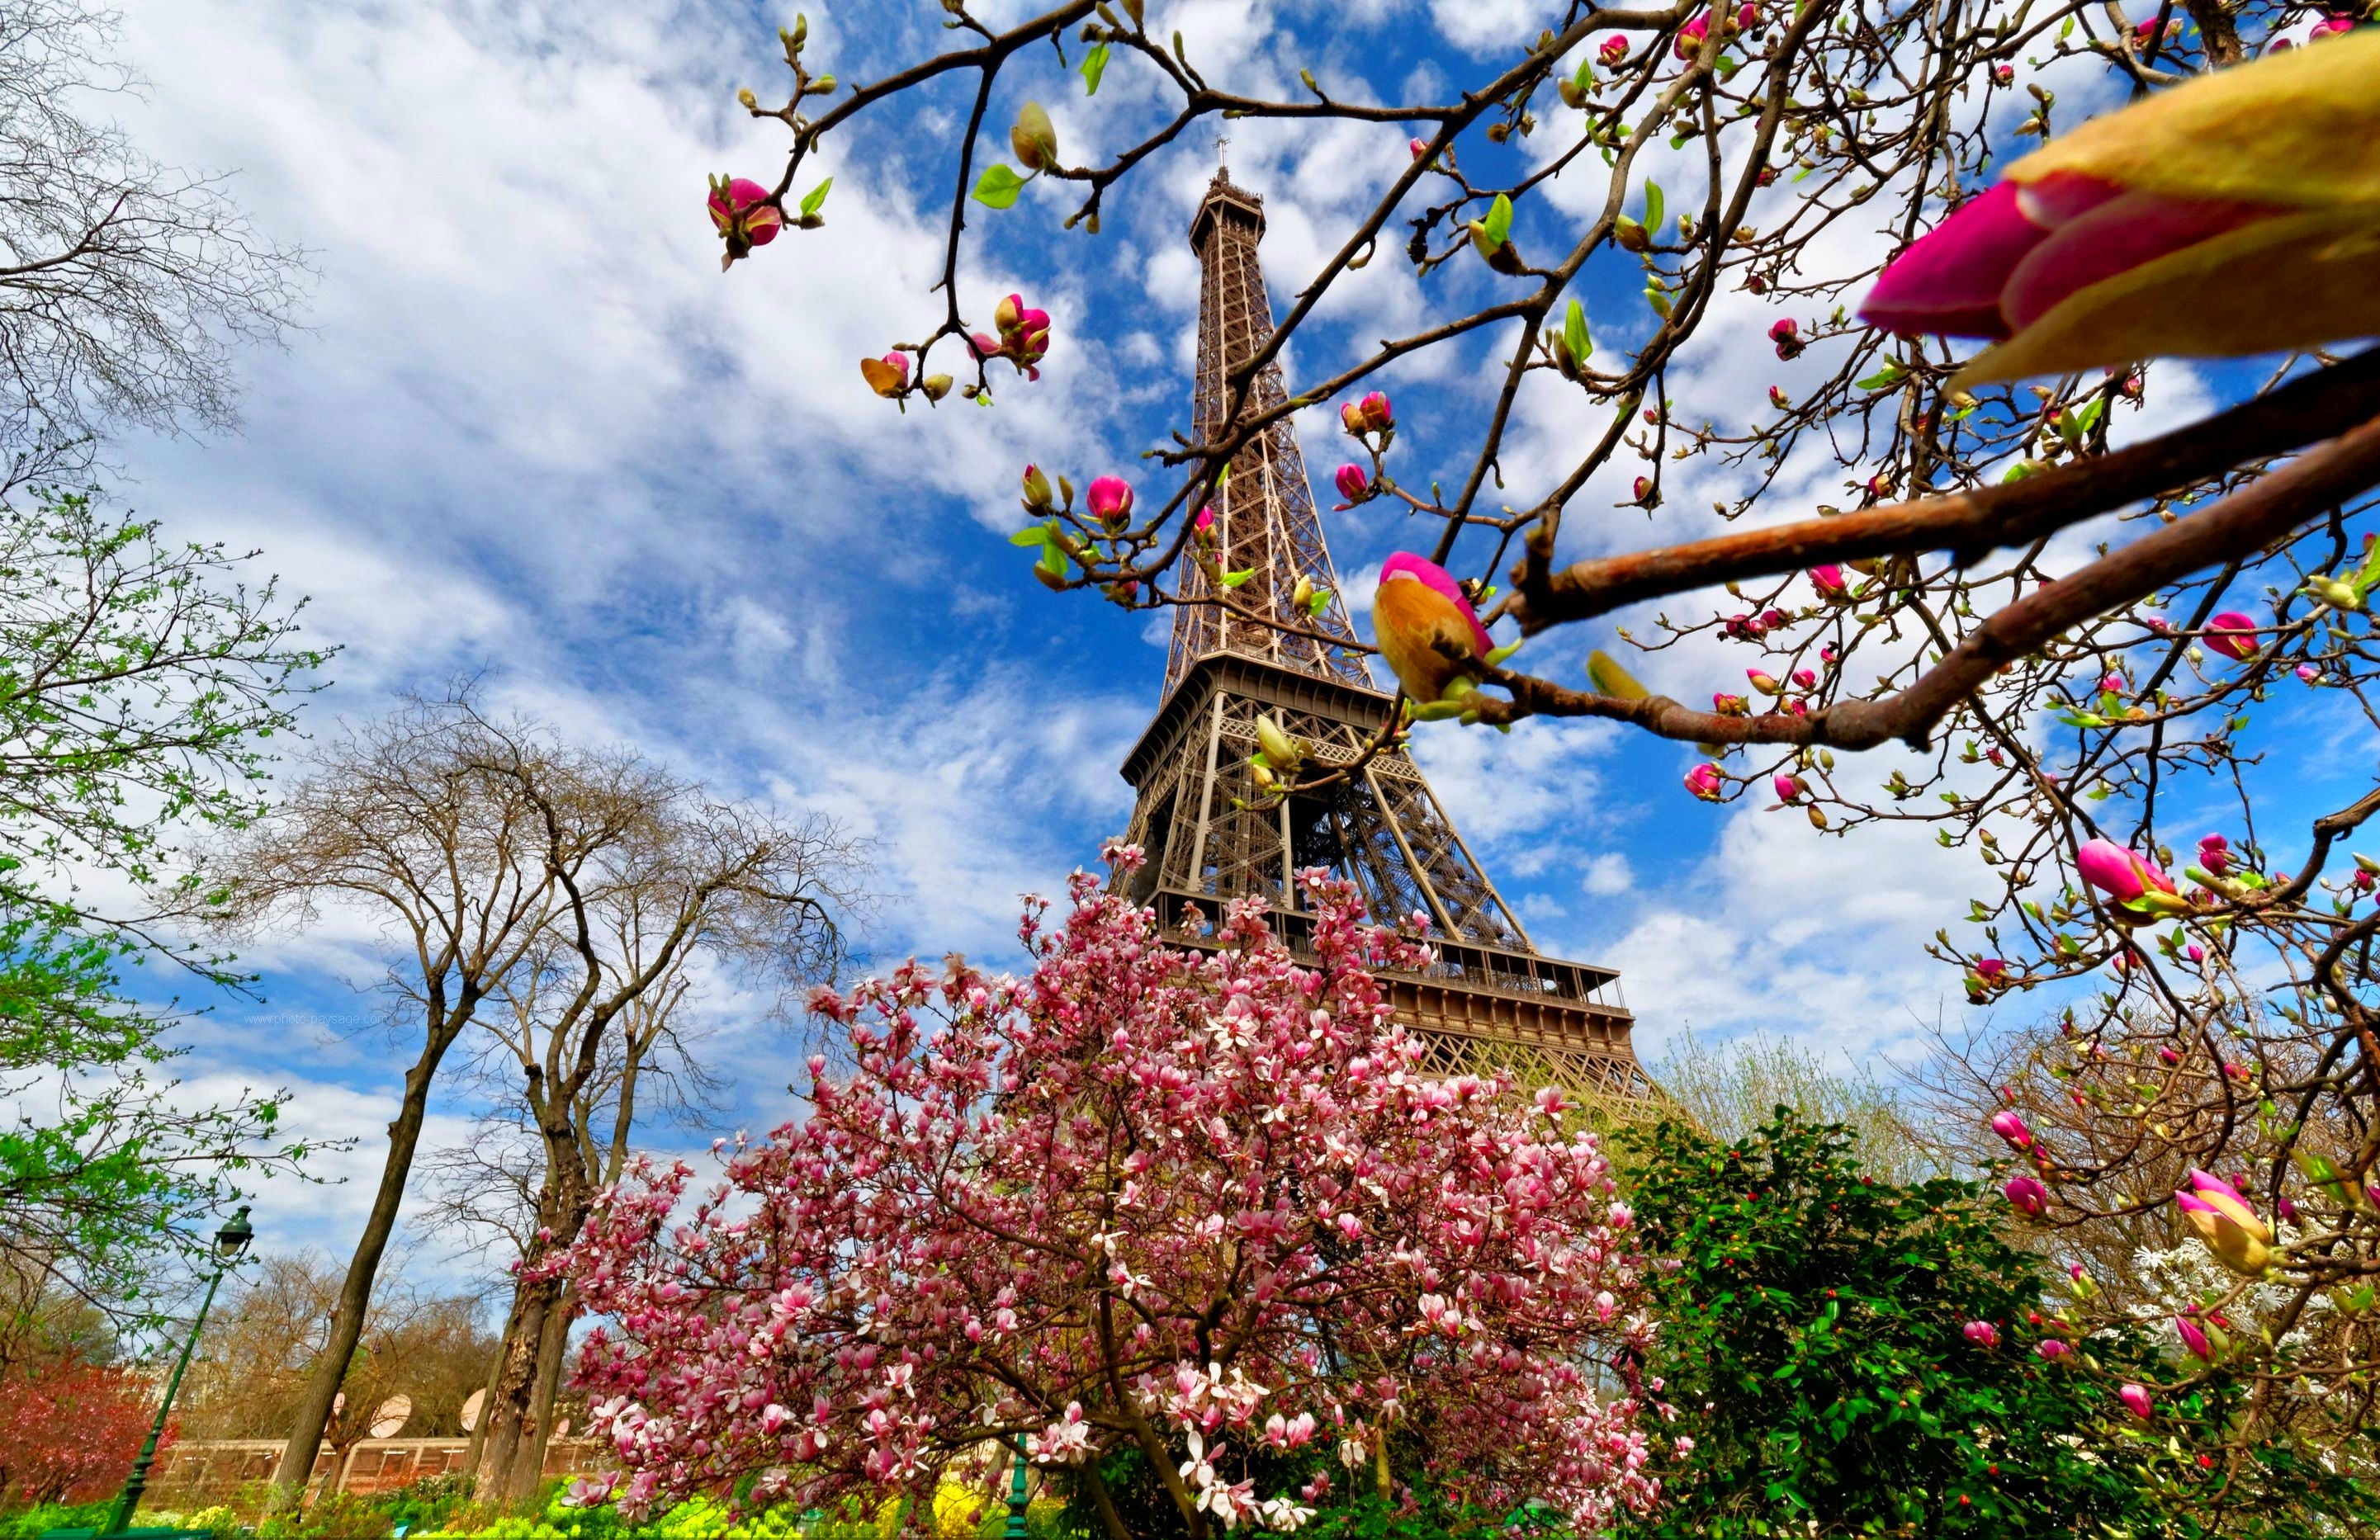 Spring vacation ideas, where to travel in Spring